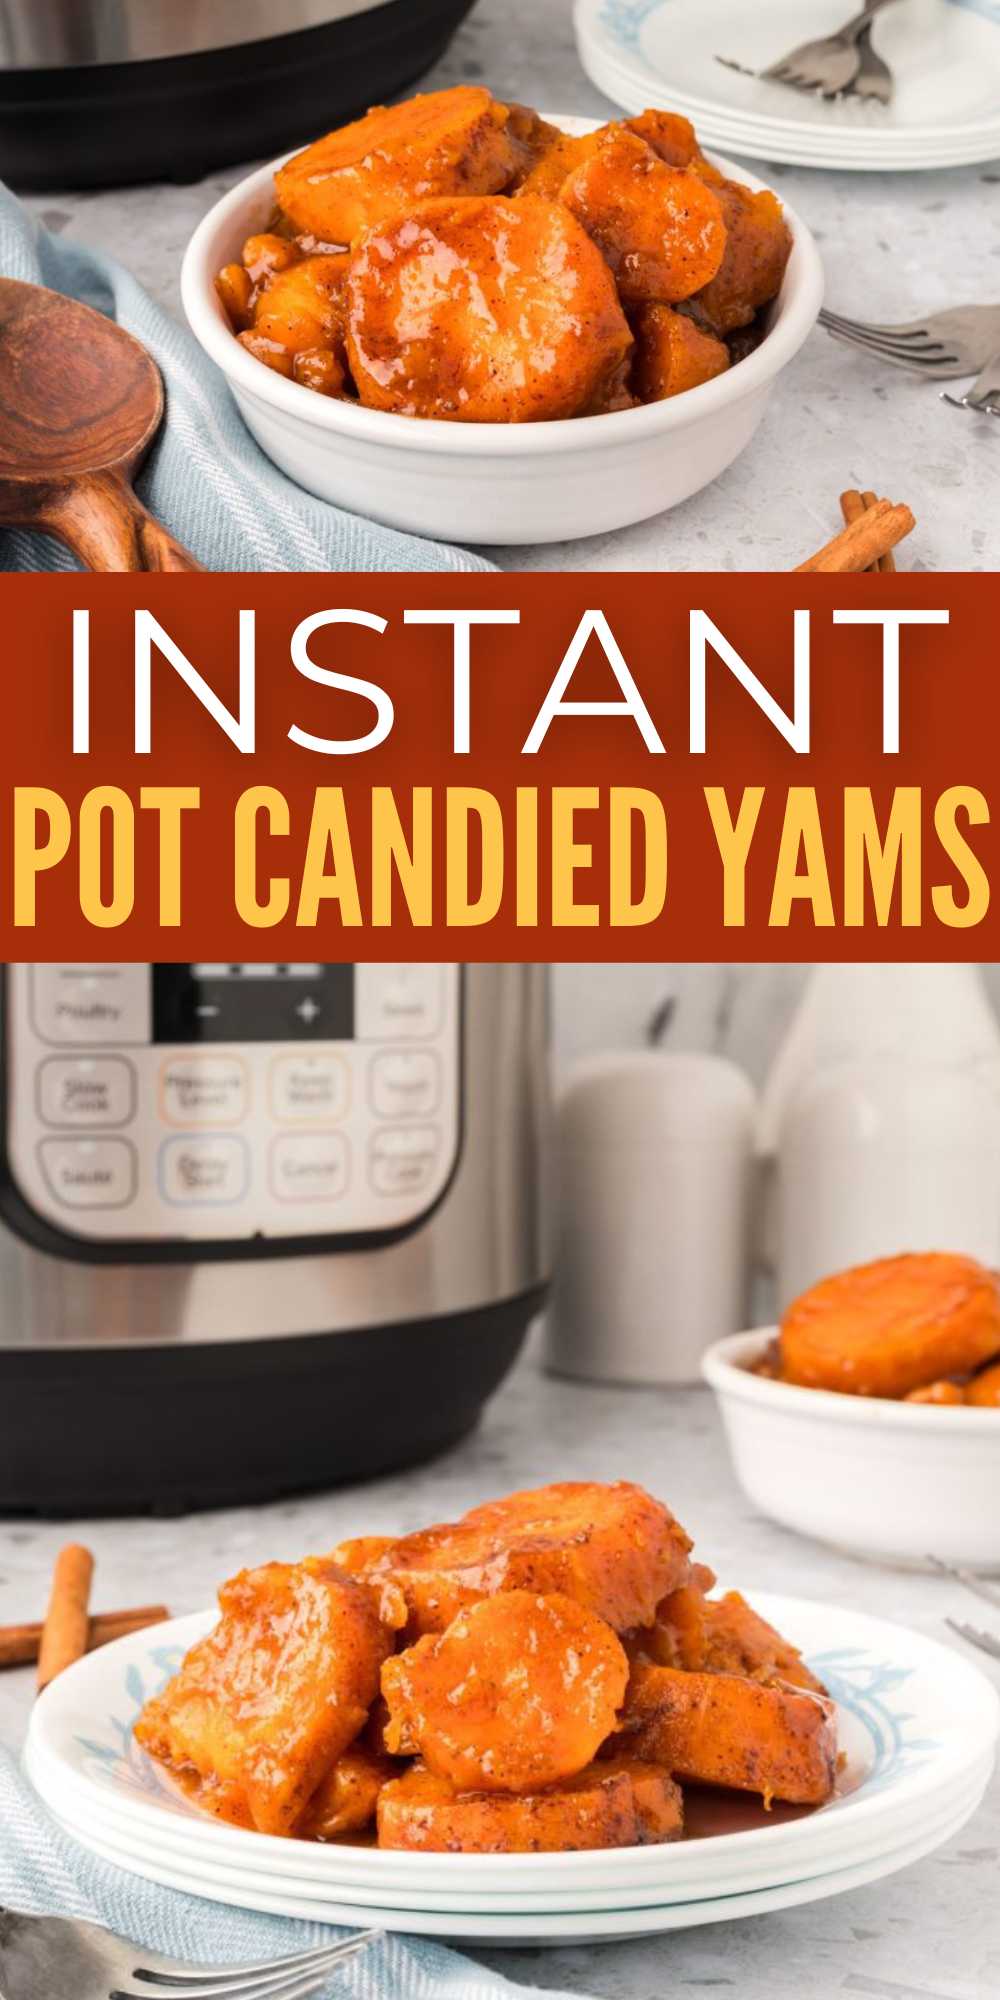 Instant Pot Candied Yams is a quick and easy way to make this holiday side dish. It is cooked with simple ingredients for amazing flavor. Whether you are cooking them for the holidays or with as a summertime side dish, they are always a crowd favorite. The sweet warm spices really makes this dish taste amazing. #eatingonadime #instantpotcandiedyams #candiedyams